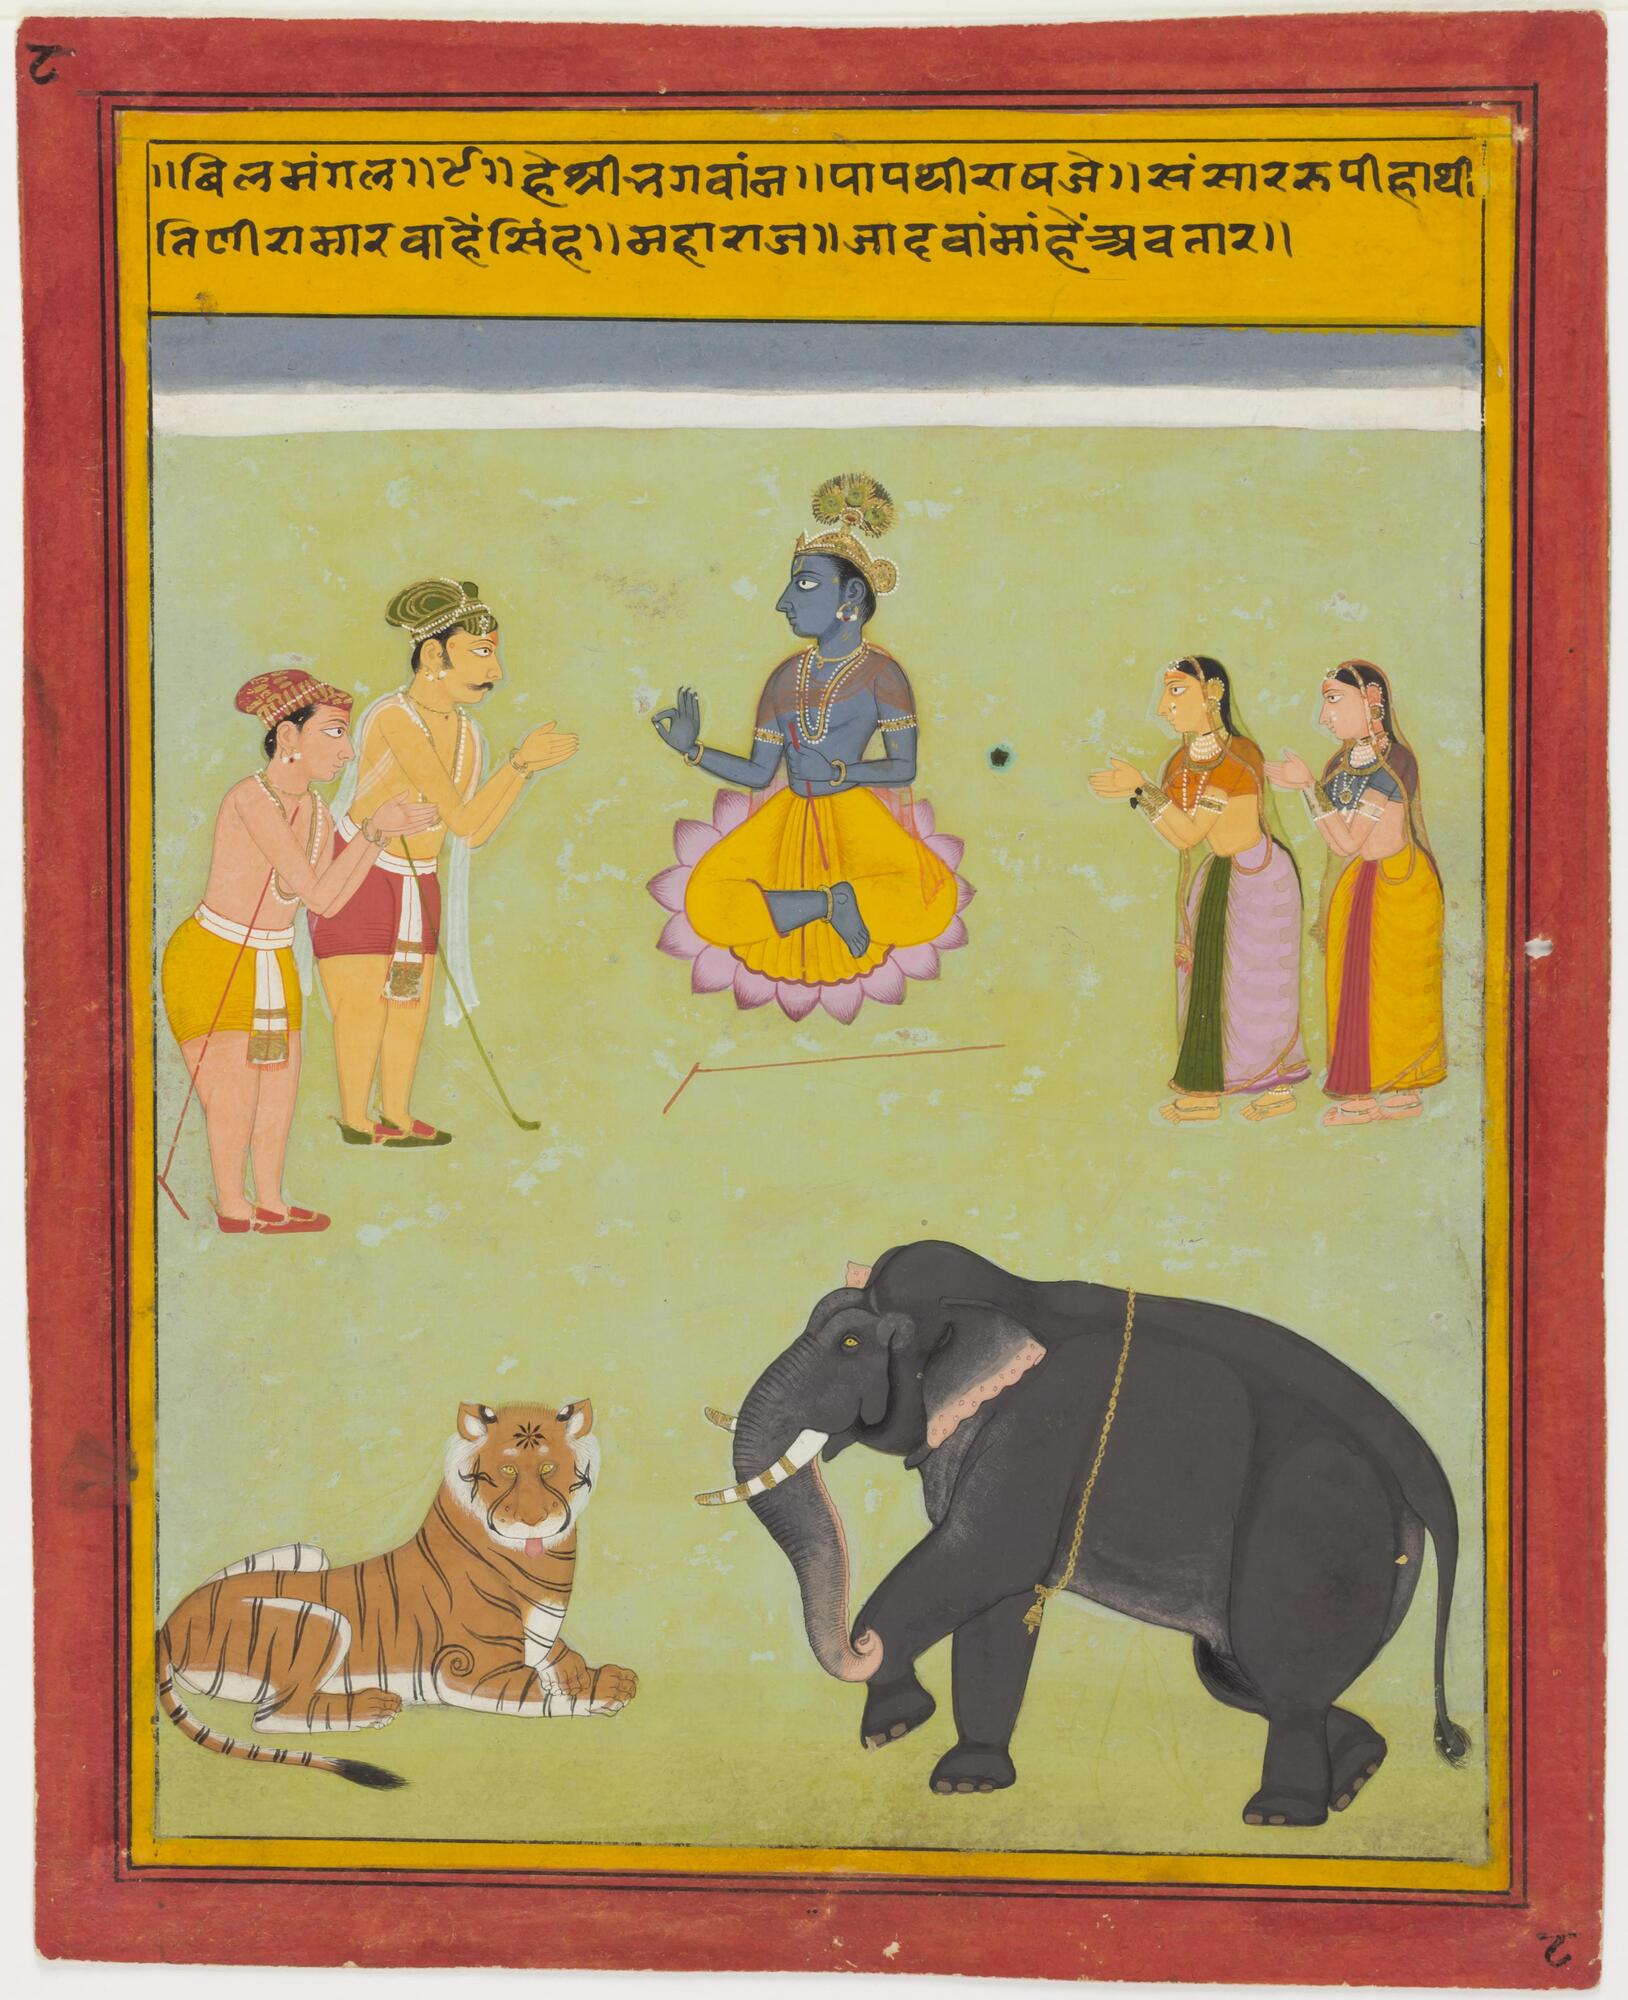 Ink, watercolor and gold on paper. Central figure, Vishnu with devotees on his right and left. Male figures are located on the left side of Vishnu and the female figures on the right. The animals are depicted on the lower half of the portrait which goes with traditional hierarchical beliefs. The tiger is on the left and the elephant on the right.